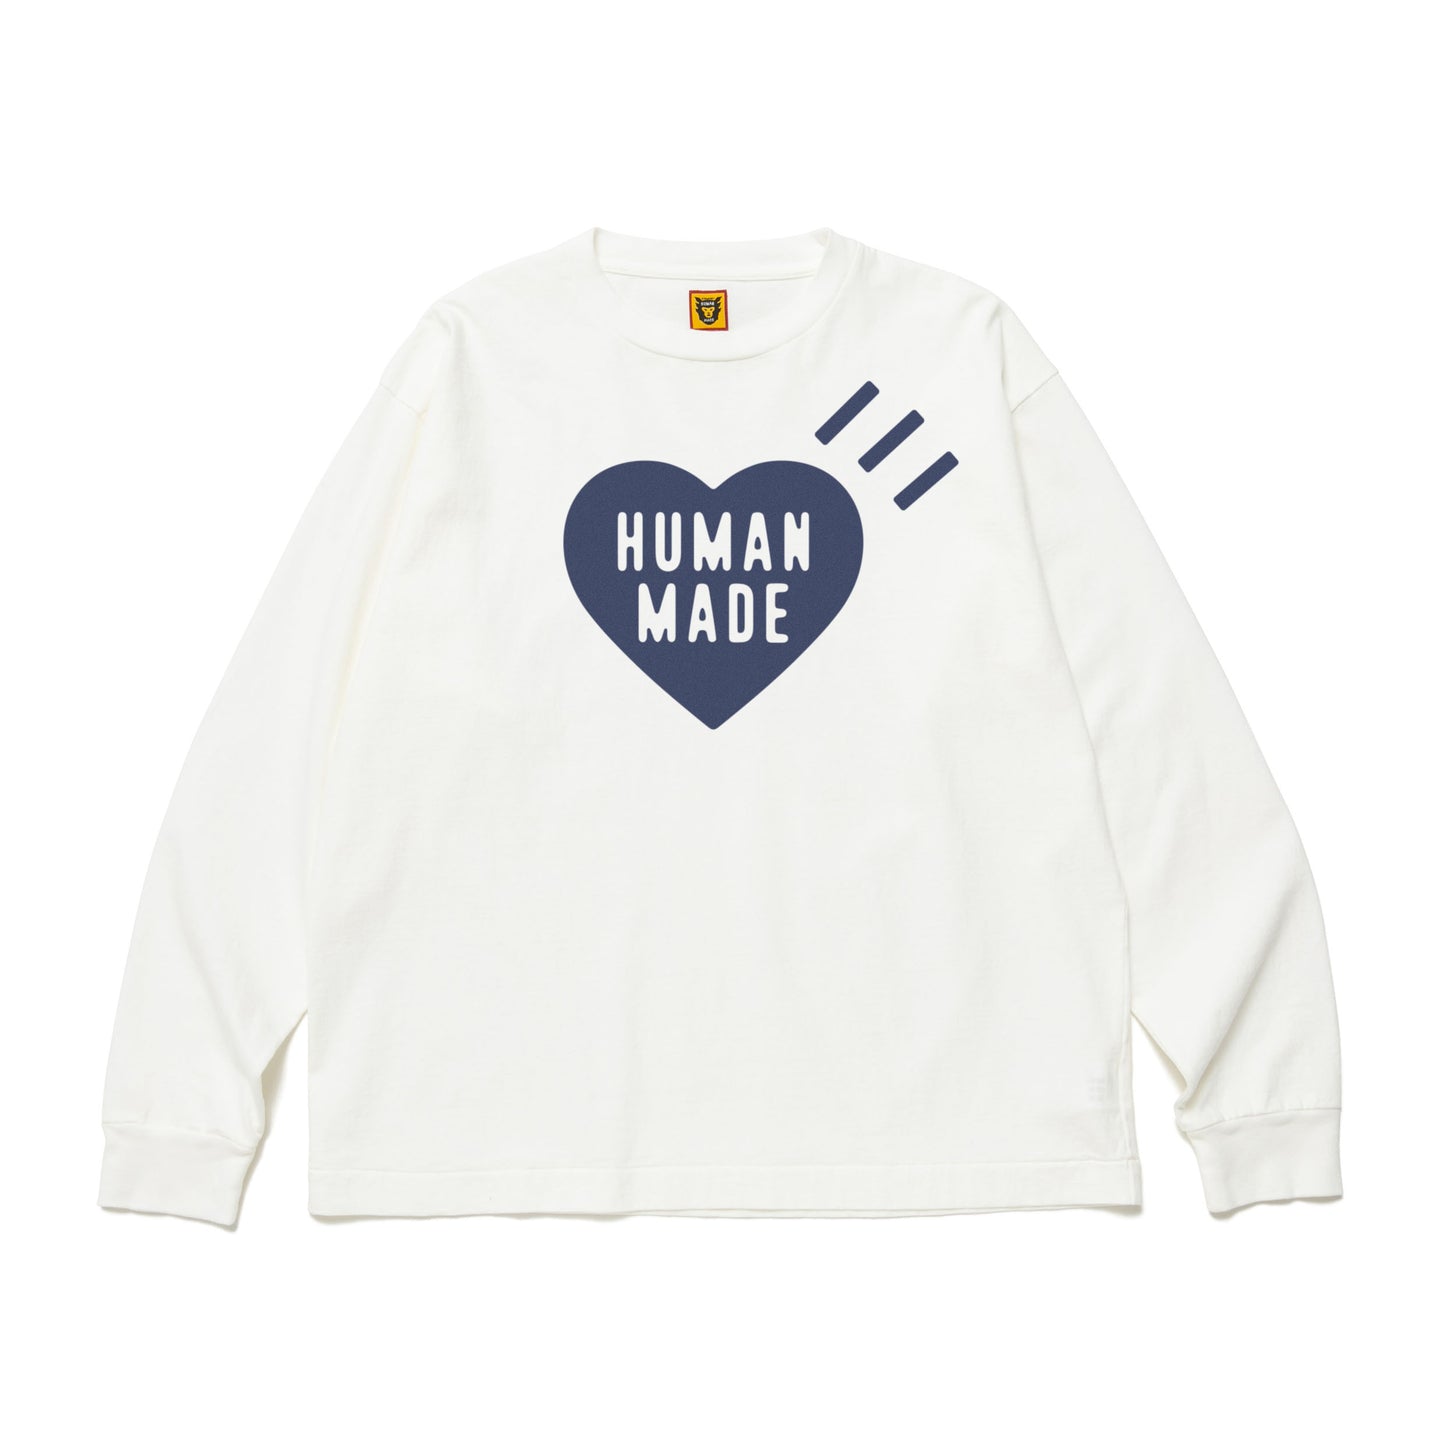 HUMAN MADE Graphic L/S T-Shirt #4